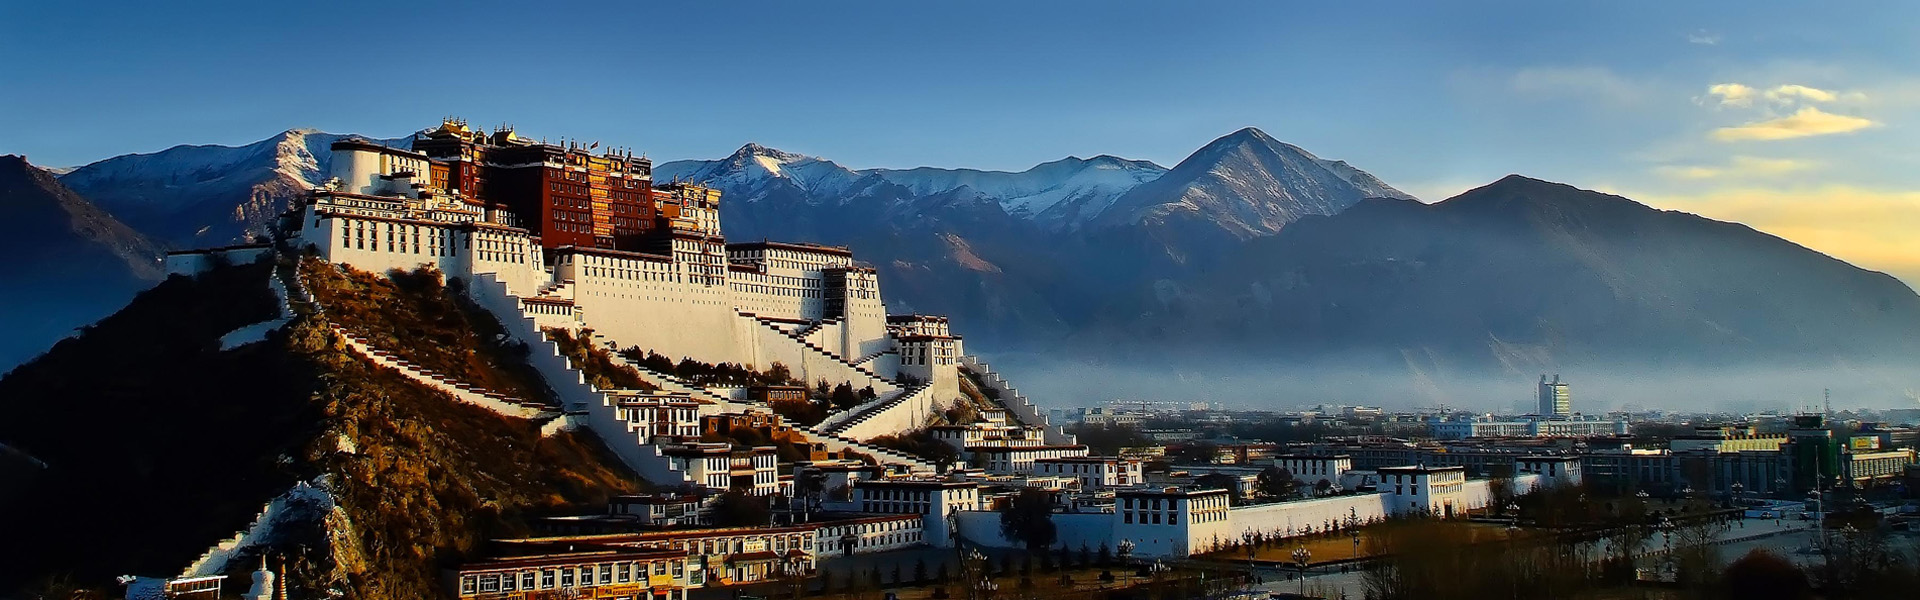 Nice Images Collection: Potala Palace Desktop Wallpapers